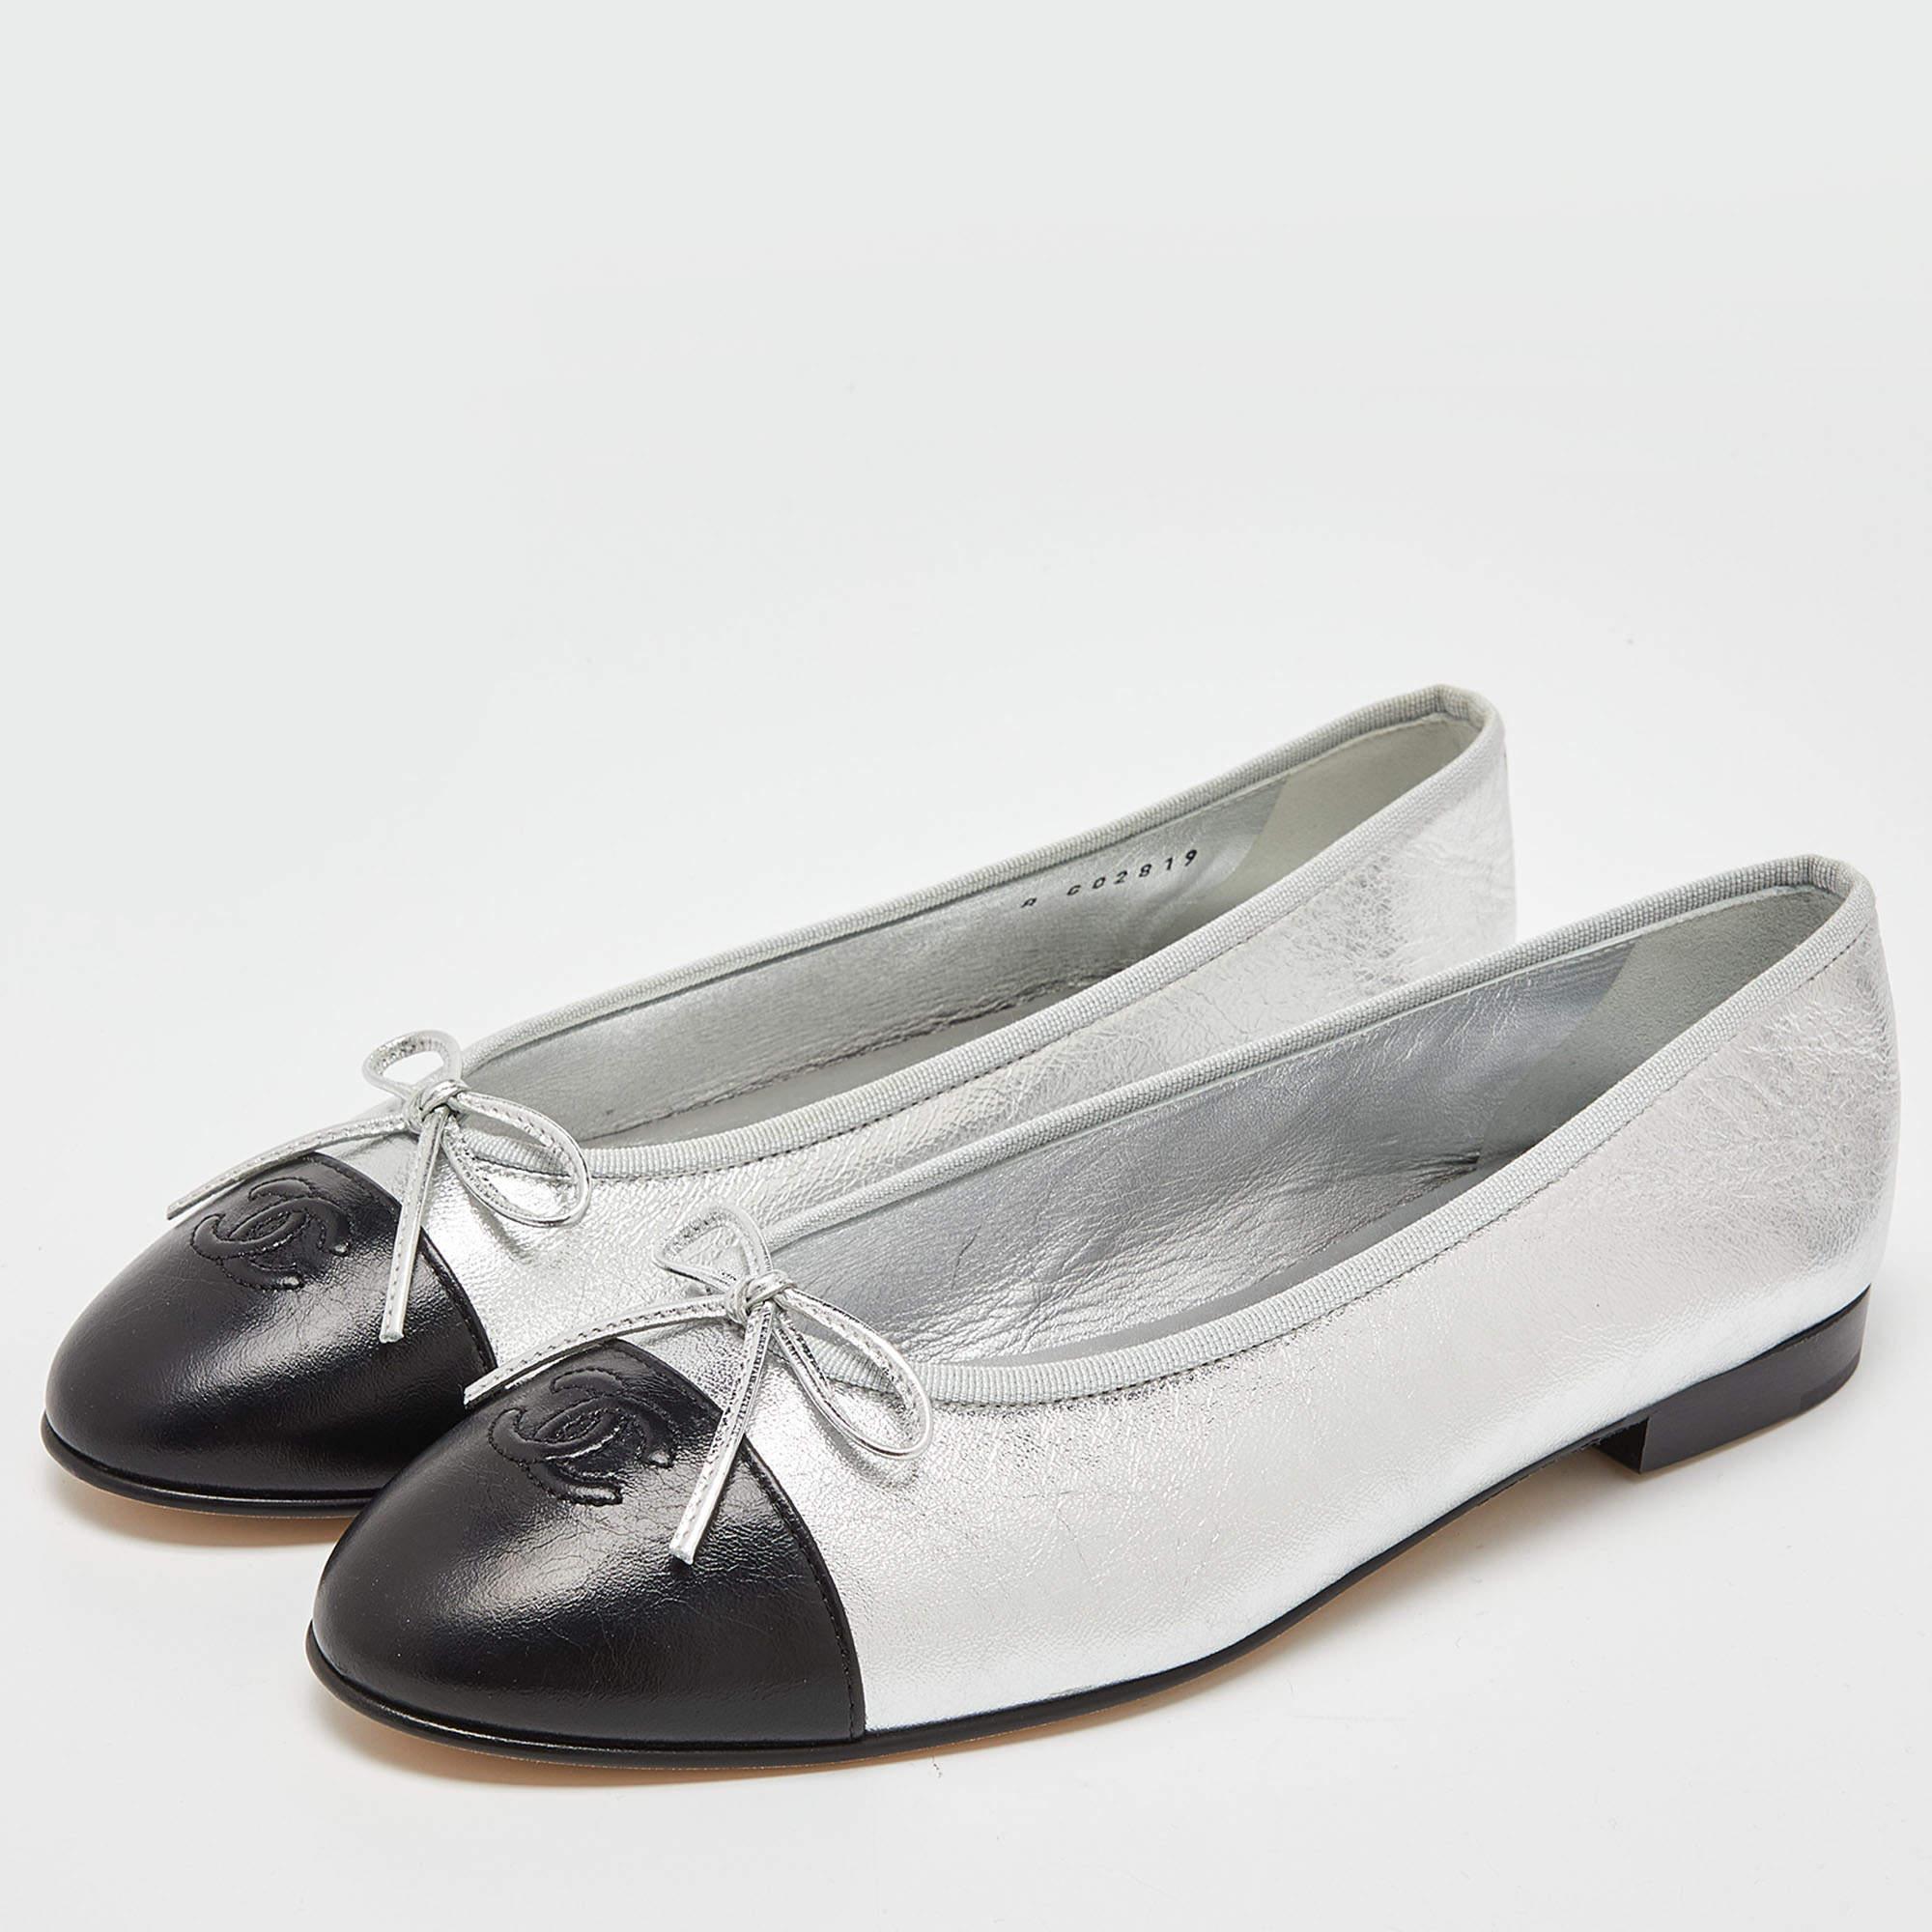 Chic and simple, these ballet flats from Chanel and perfect for a host of occasions. They have been crafted from leather and are styled with round toes, little bows, and the CC logo.

